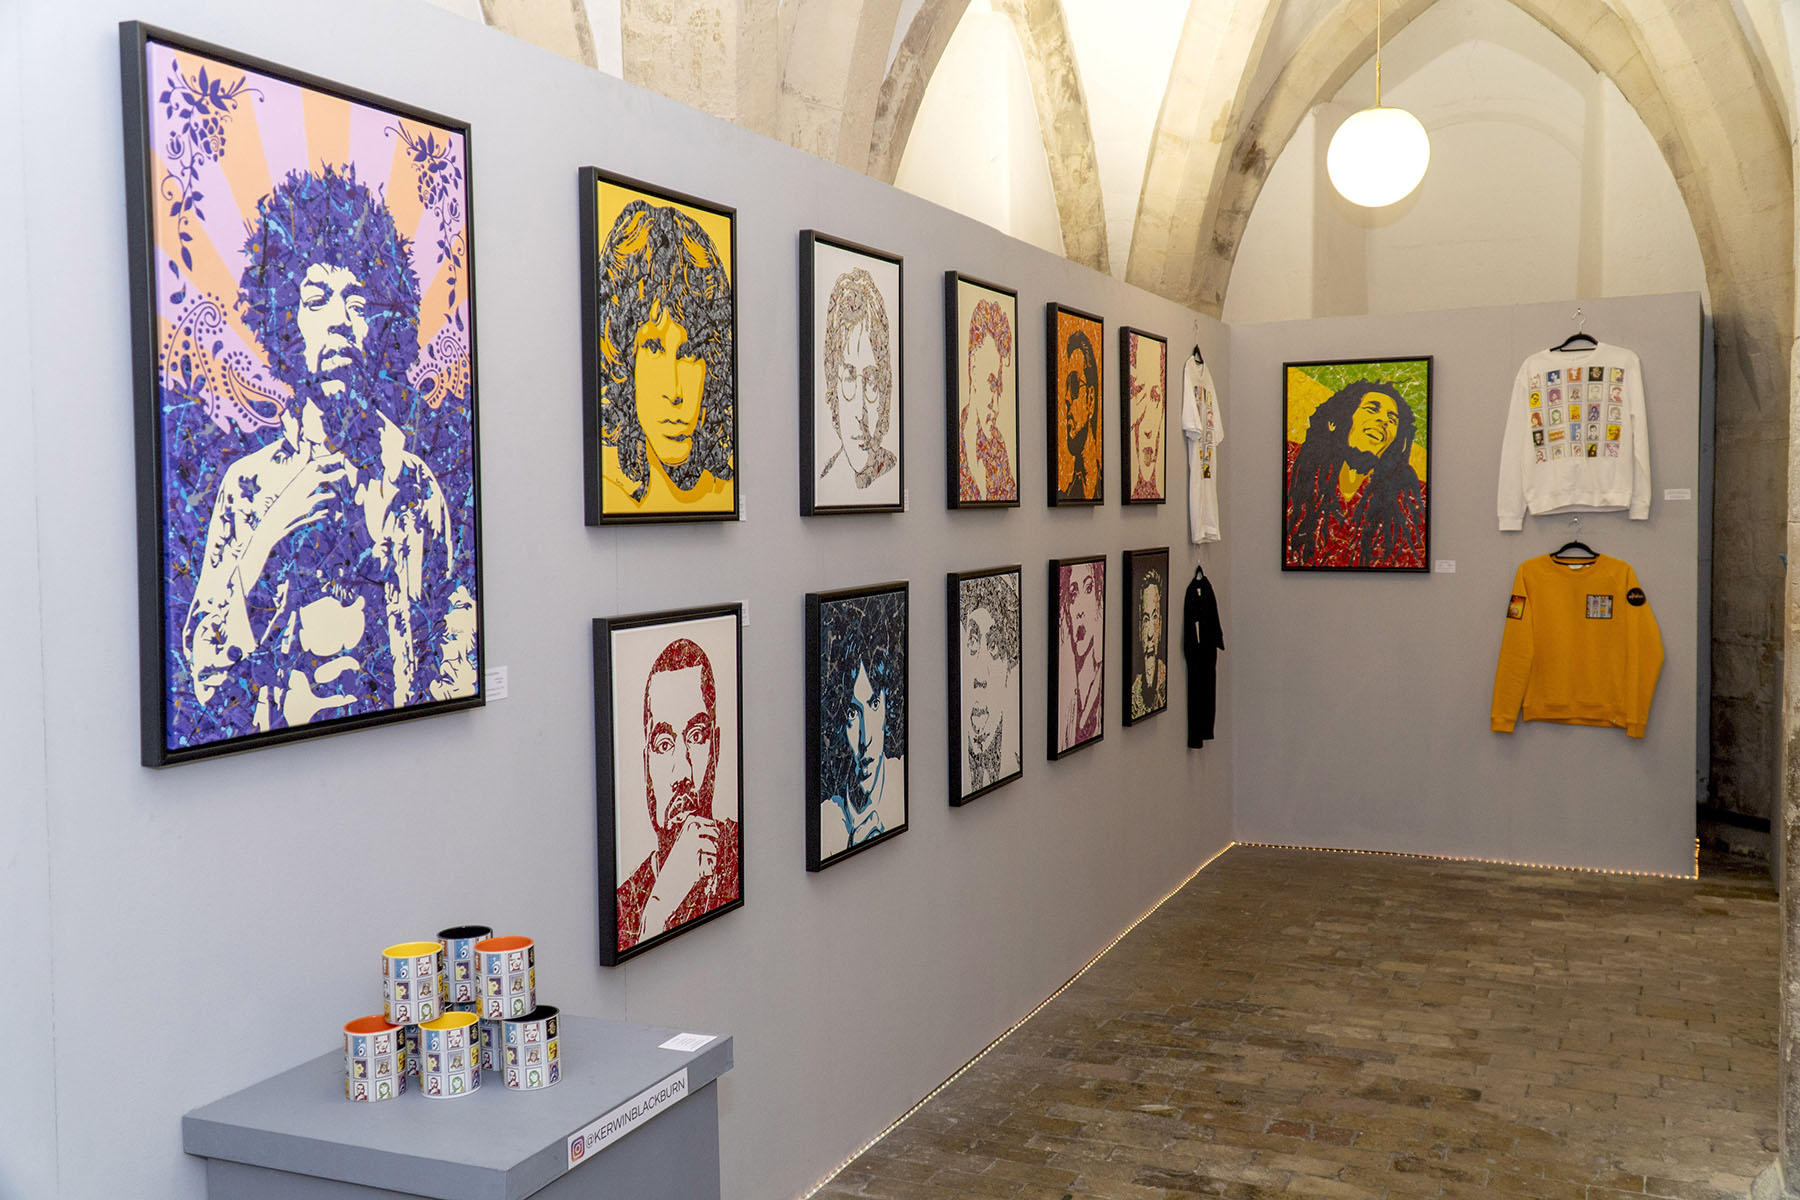 Kerwin Blackburn exhibiting his Jackson Pollock-inspired pop art music paintings at the Crypt Gallery at Norwich School in Norfolk, February-March 2022 | By Kerwin | Jimi Hendrix | Jim Morrison | Kanye West prints